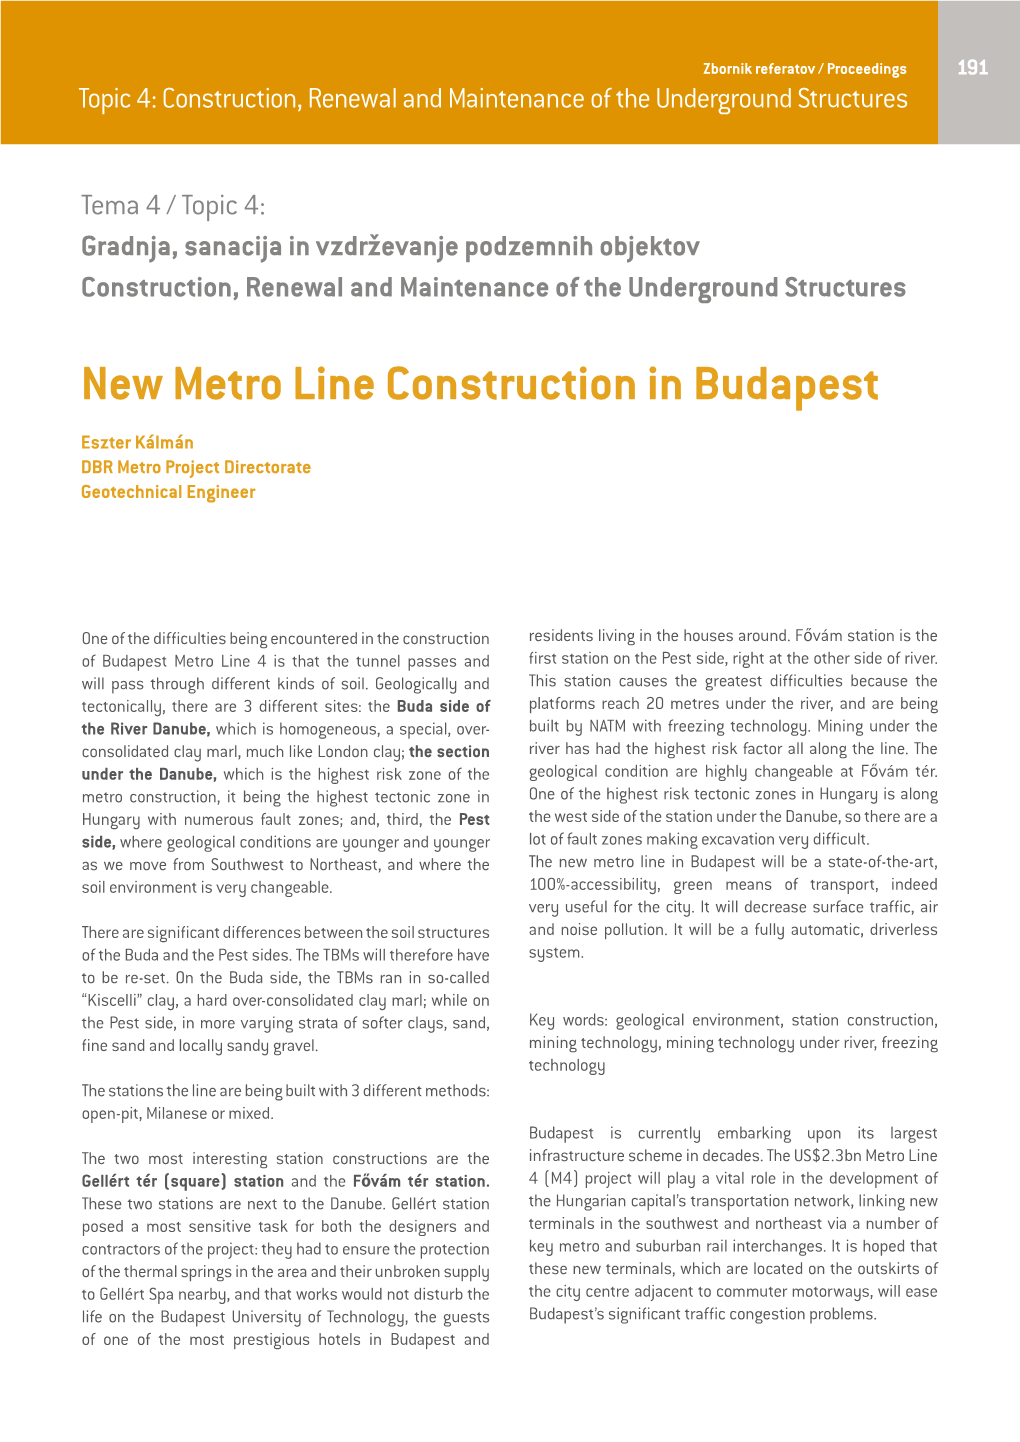 New Metro Line Construction in Budapest